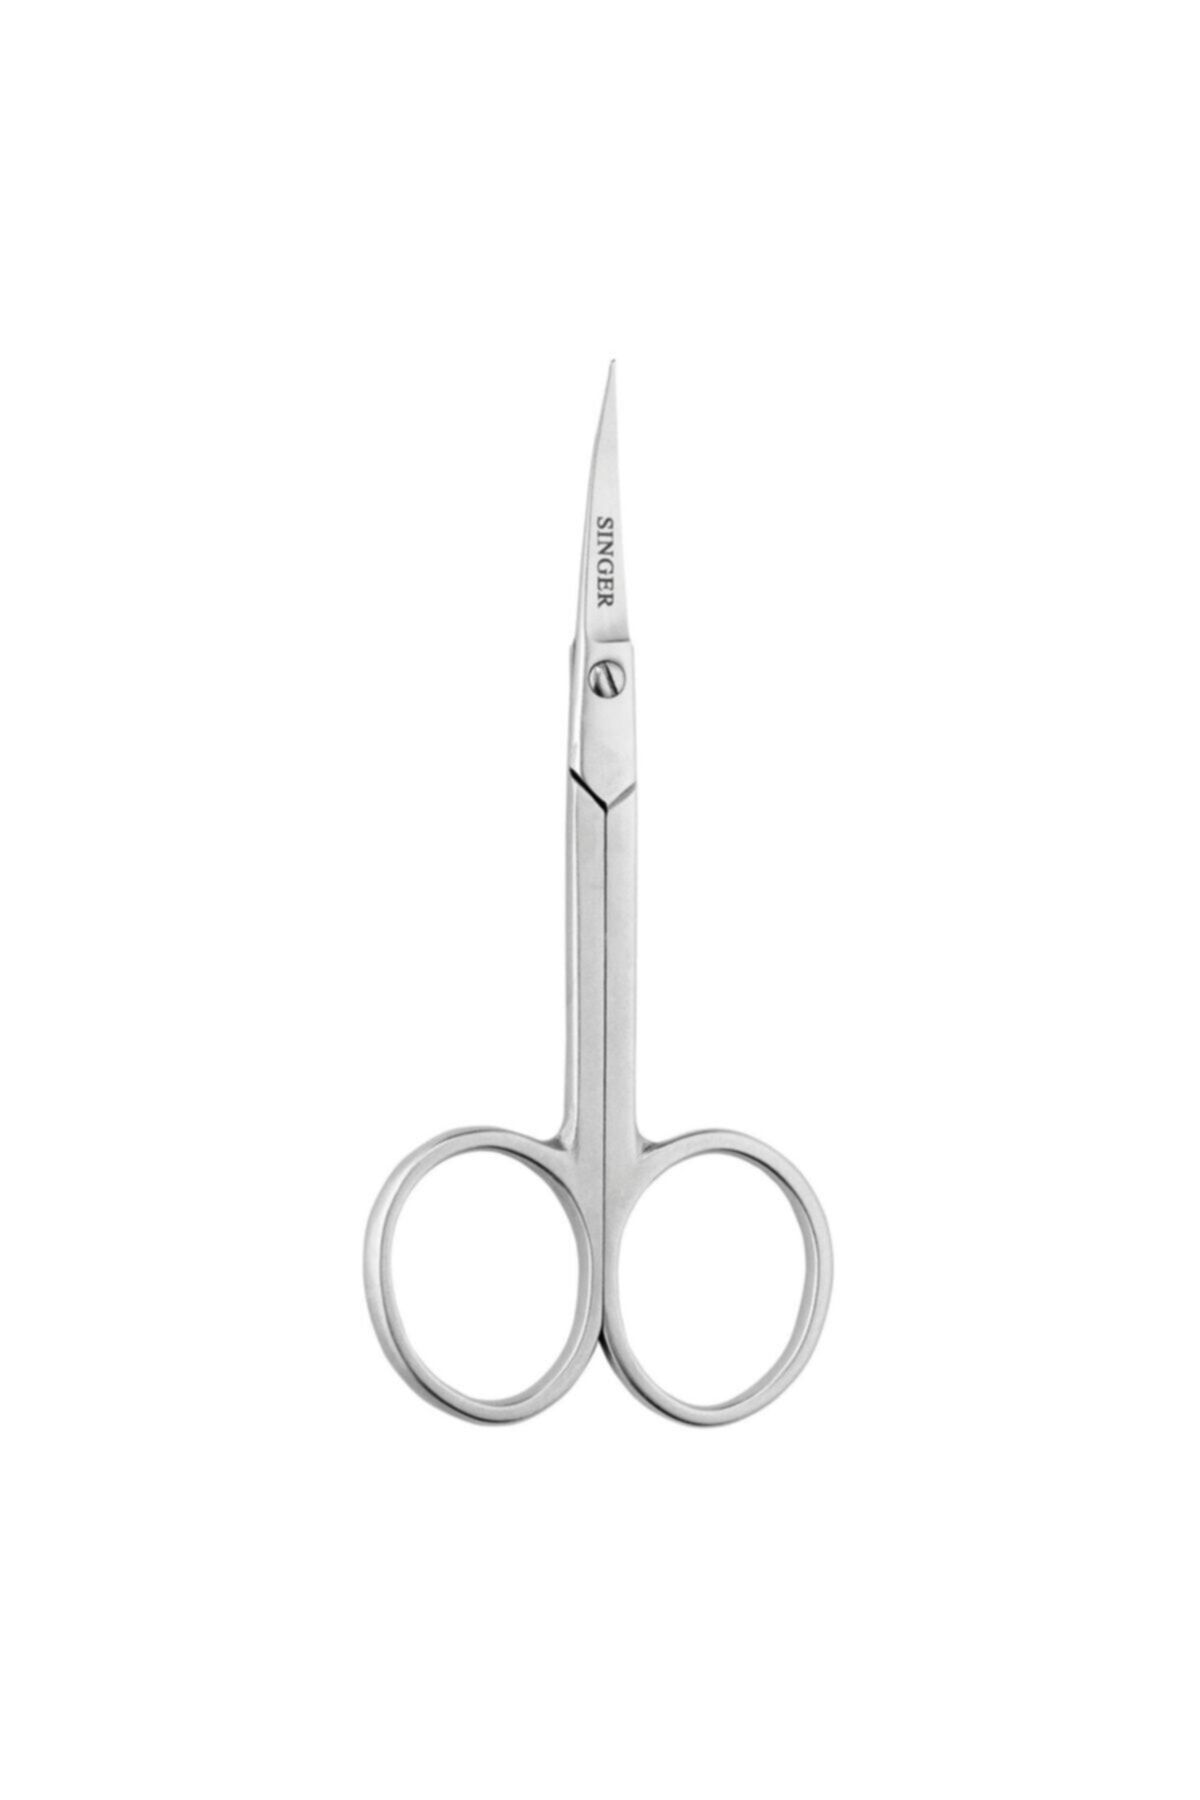 Singer Curved Embroidery Scissors - 10287-T - Hobiumyarns